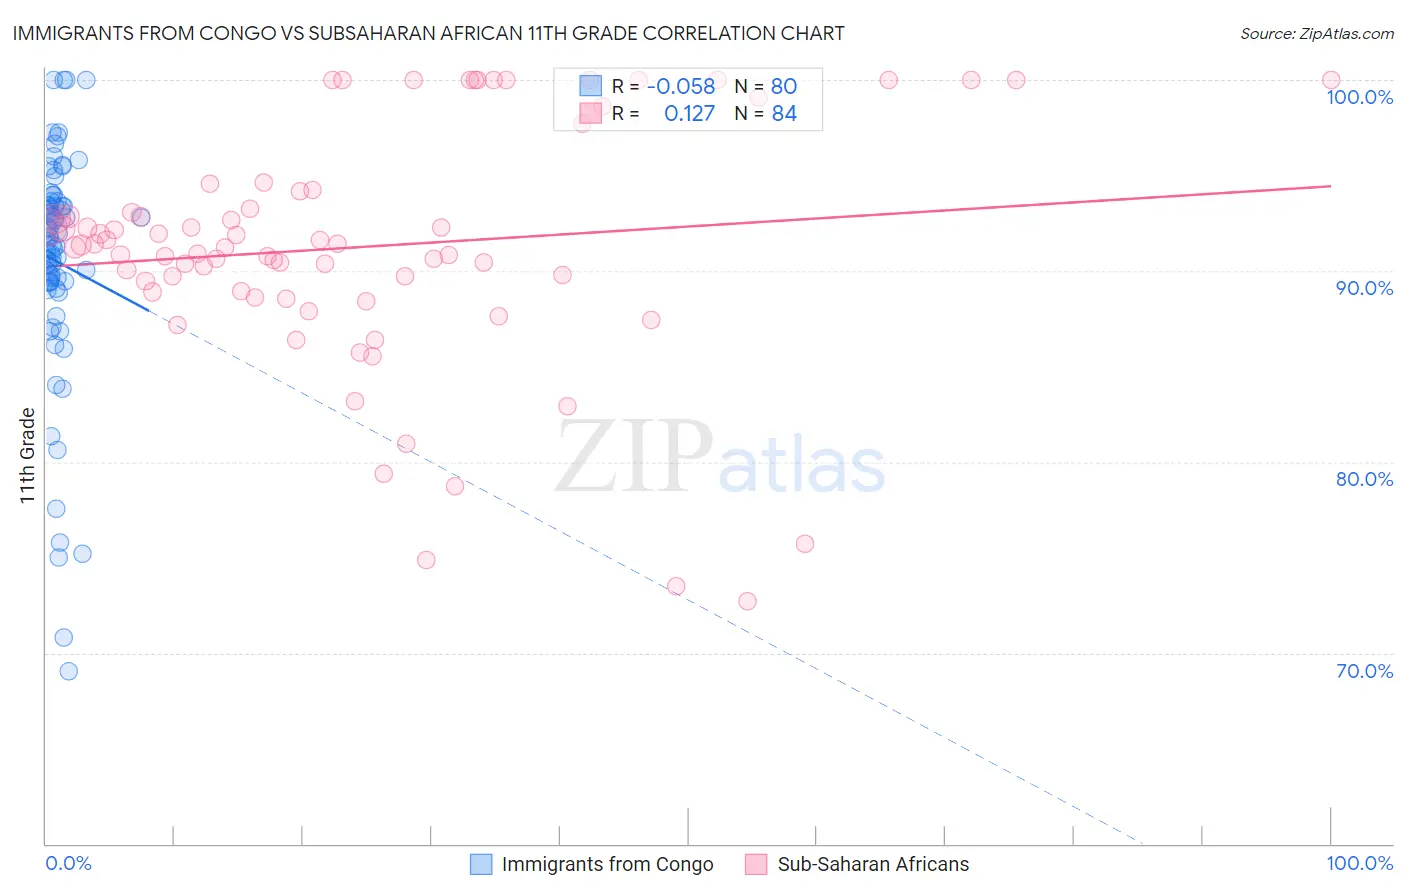 Immigrants from Congo vs Subsaharan African 11th Grade